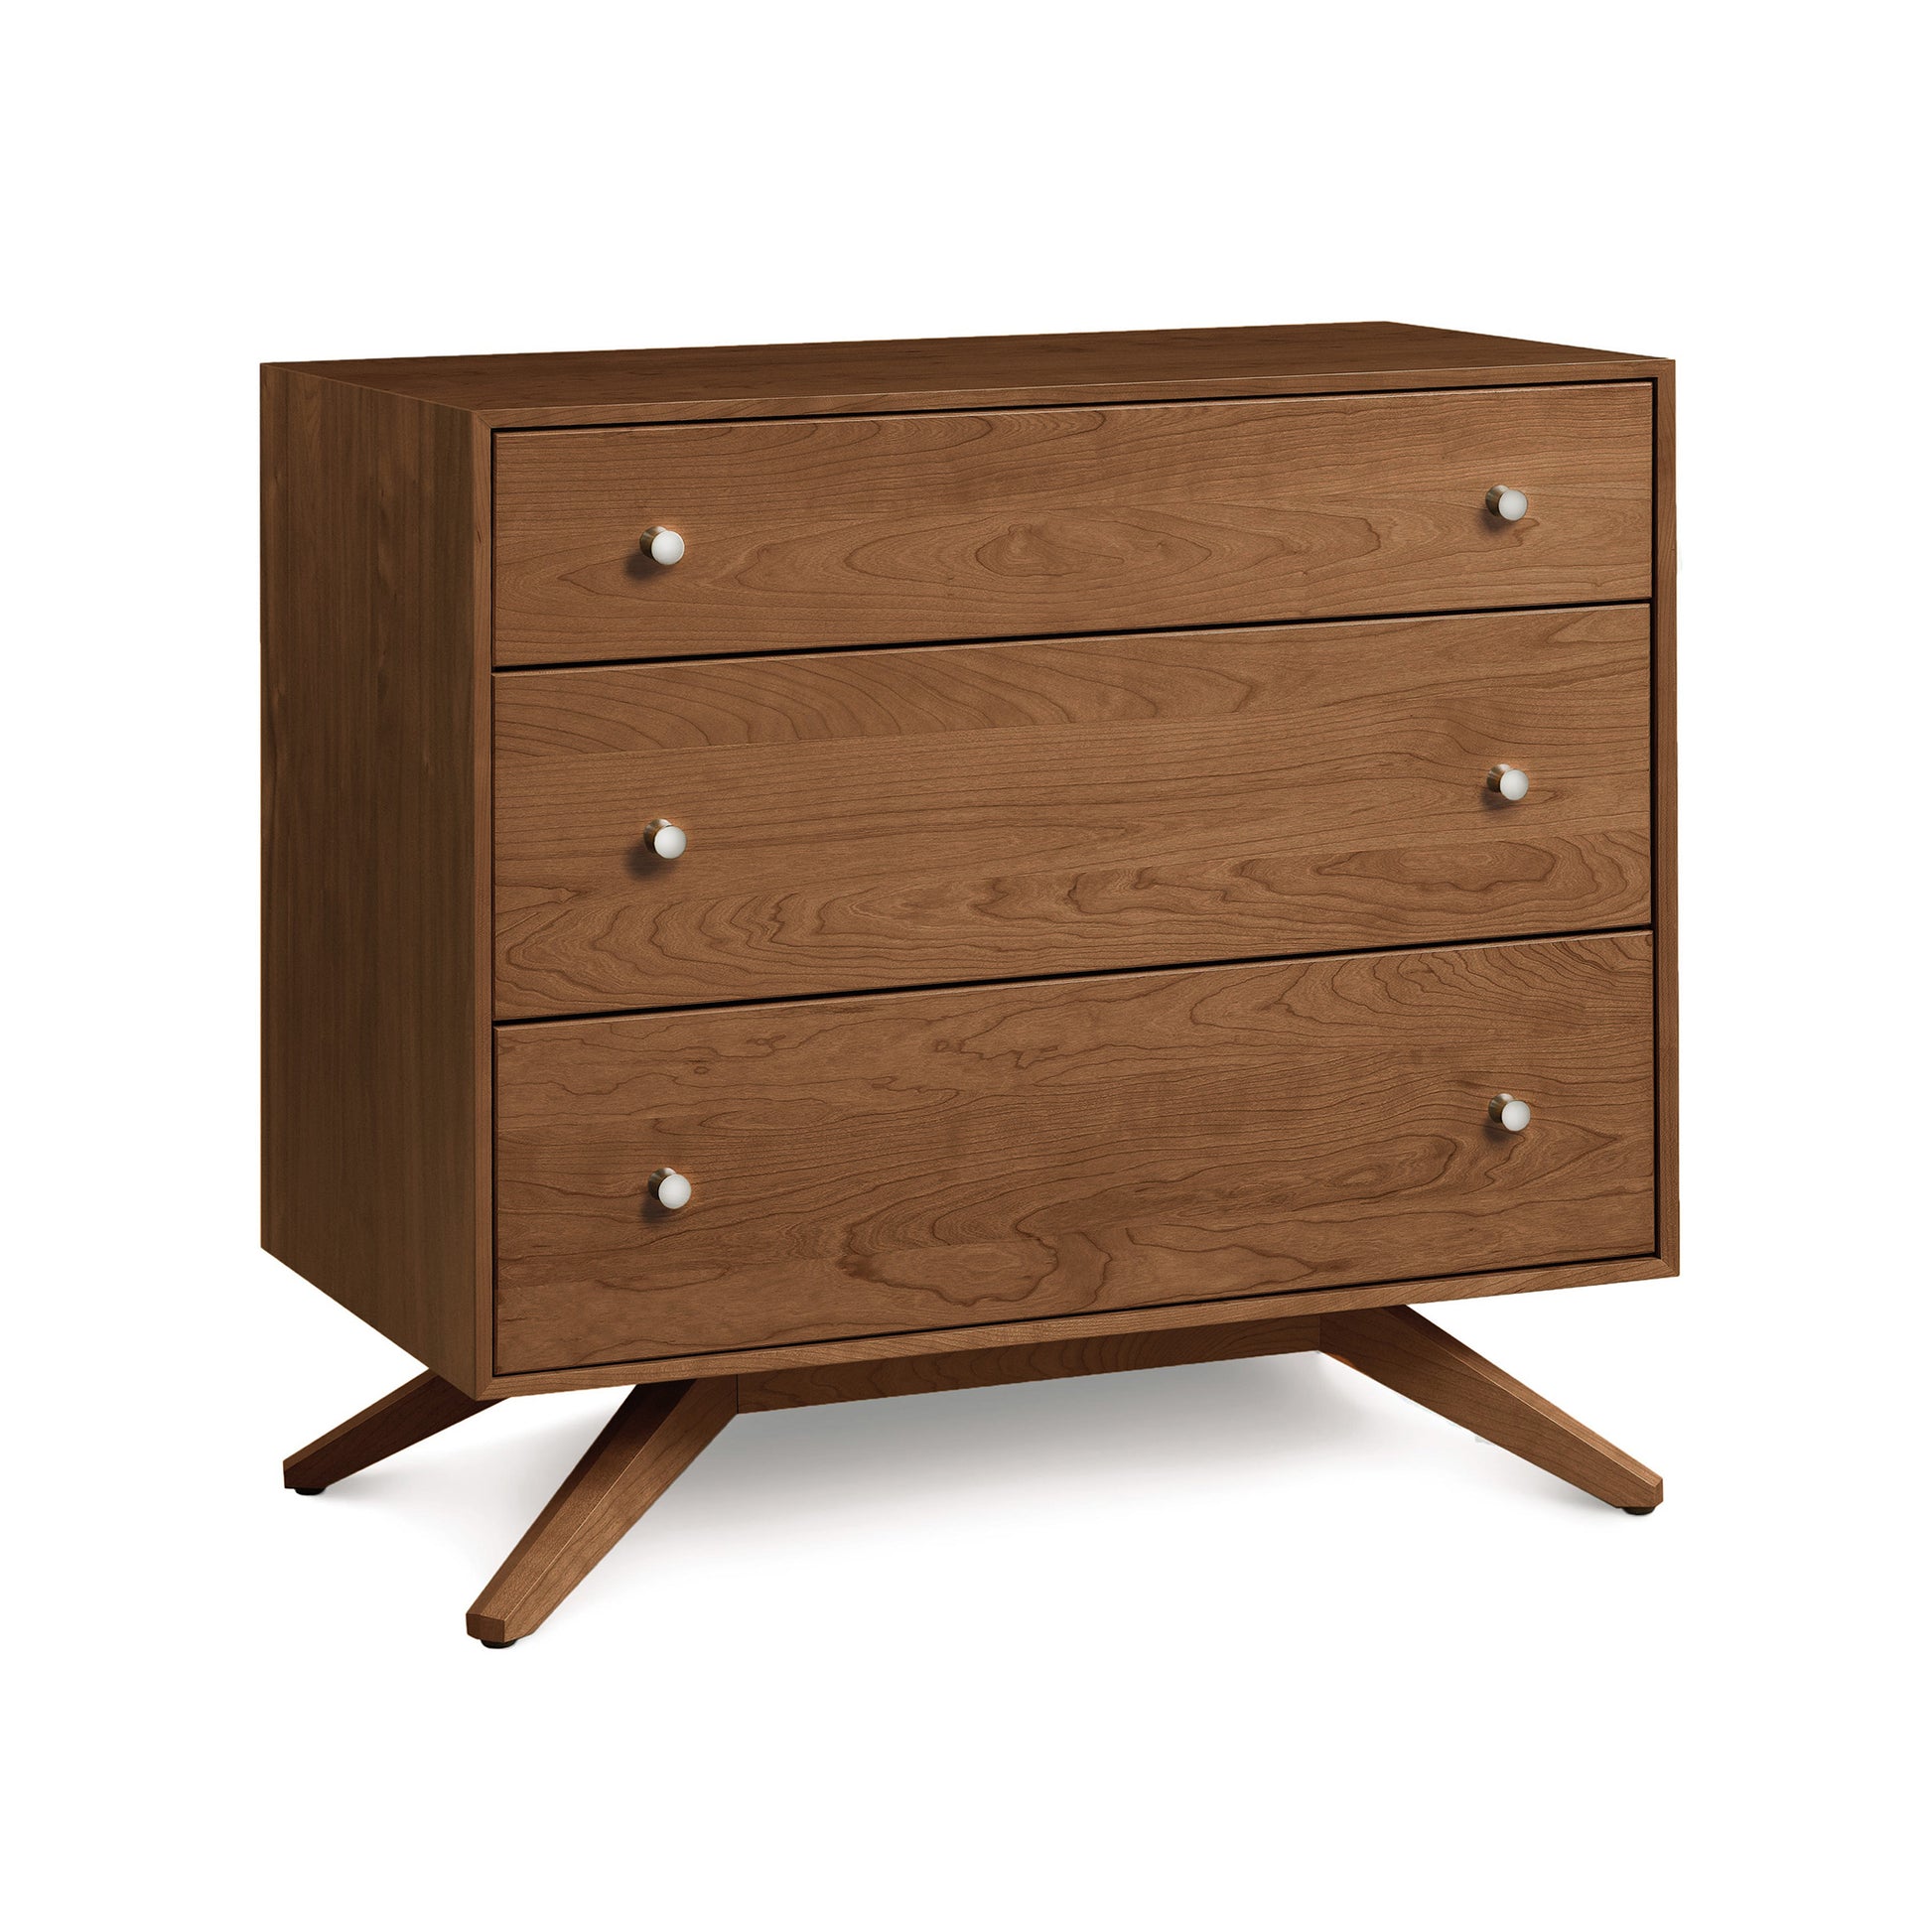 A wooden Copeland Furniture Astrid 3-Drawer Chest with angled legs, isolated on a white background.